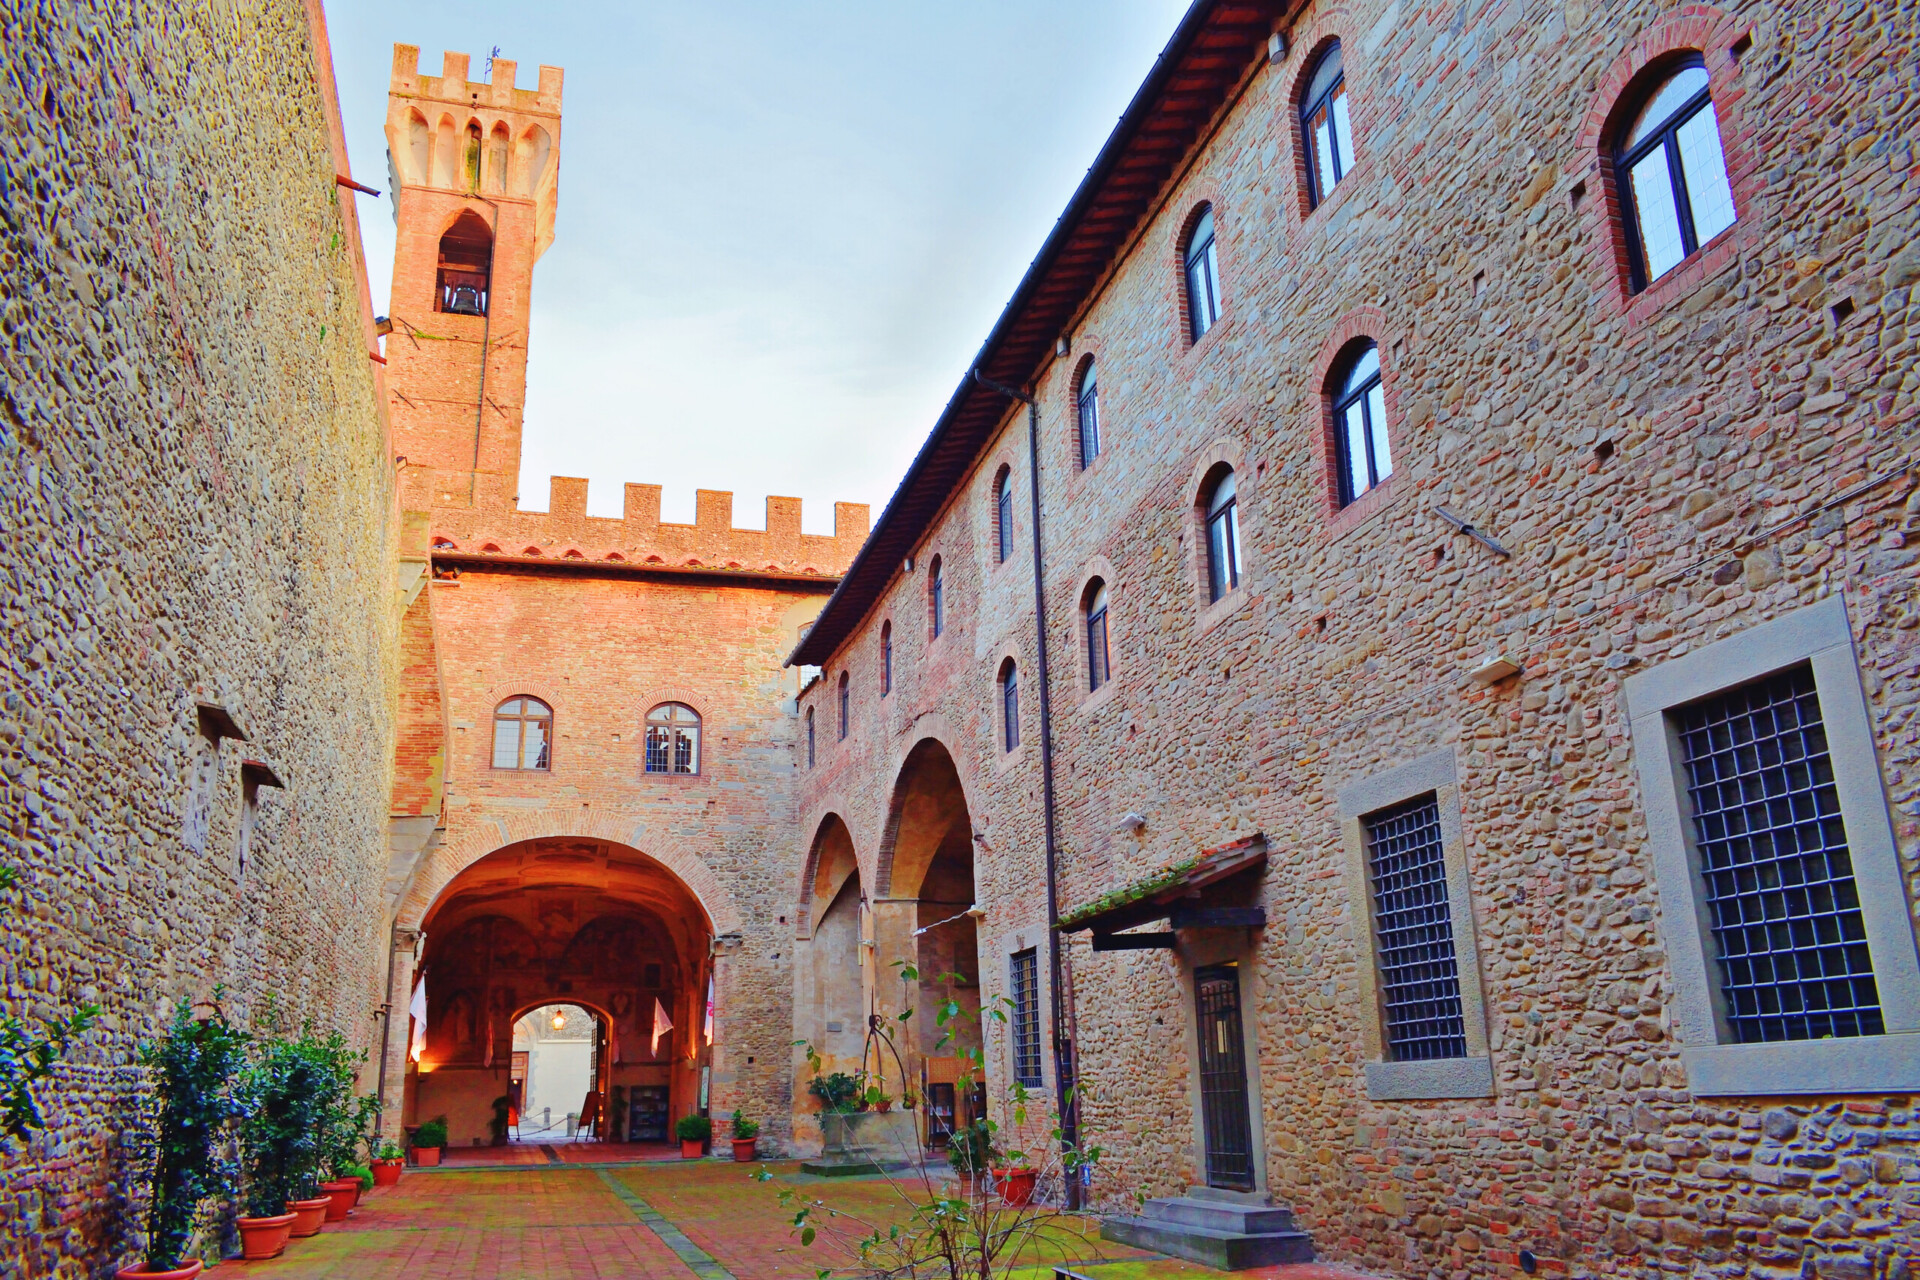 courtyard of the 14th century Palazzo dei Vicari in the town of Scarperia in Florence, Tuscany, Italy.